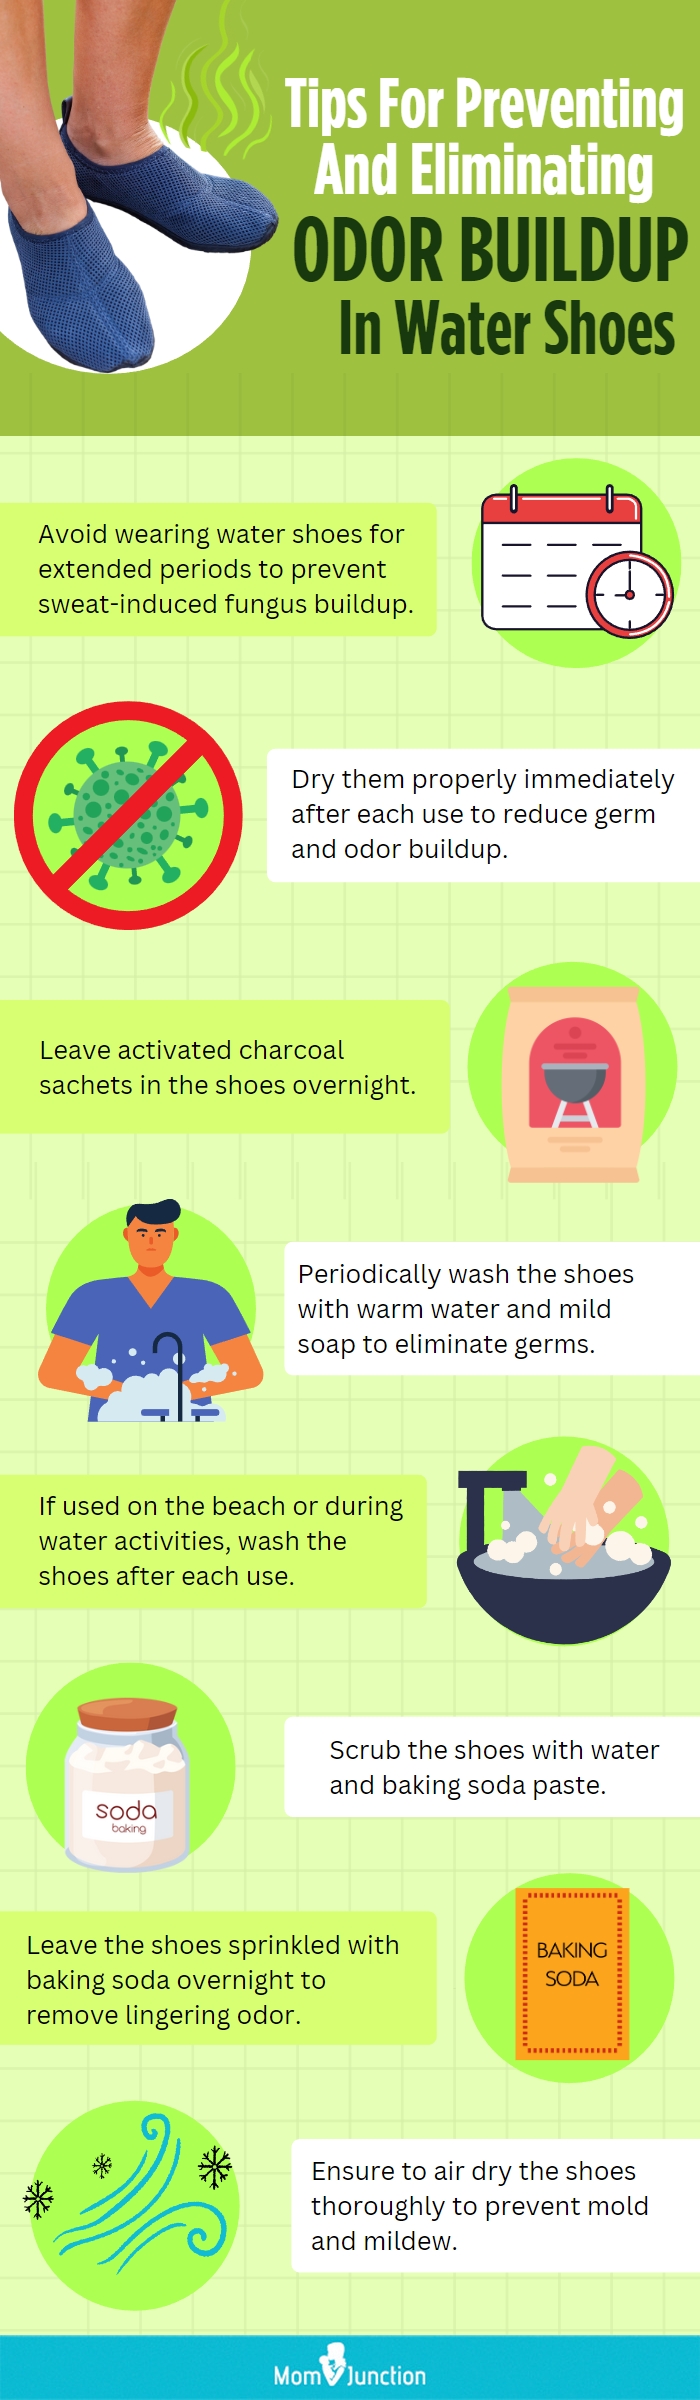 Tips For Preventing And Eliminating Odor Buildup In Water Shoes (infographic)